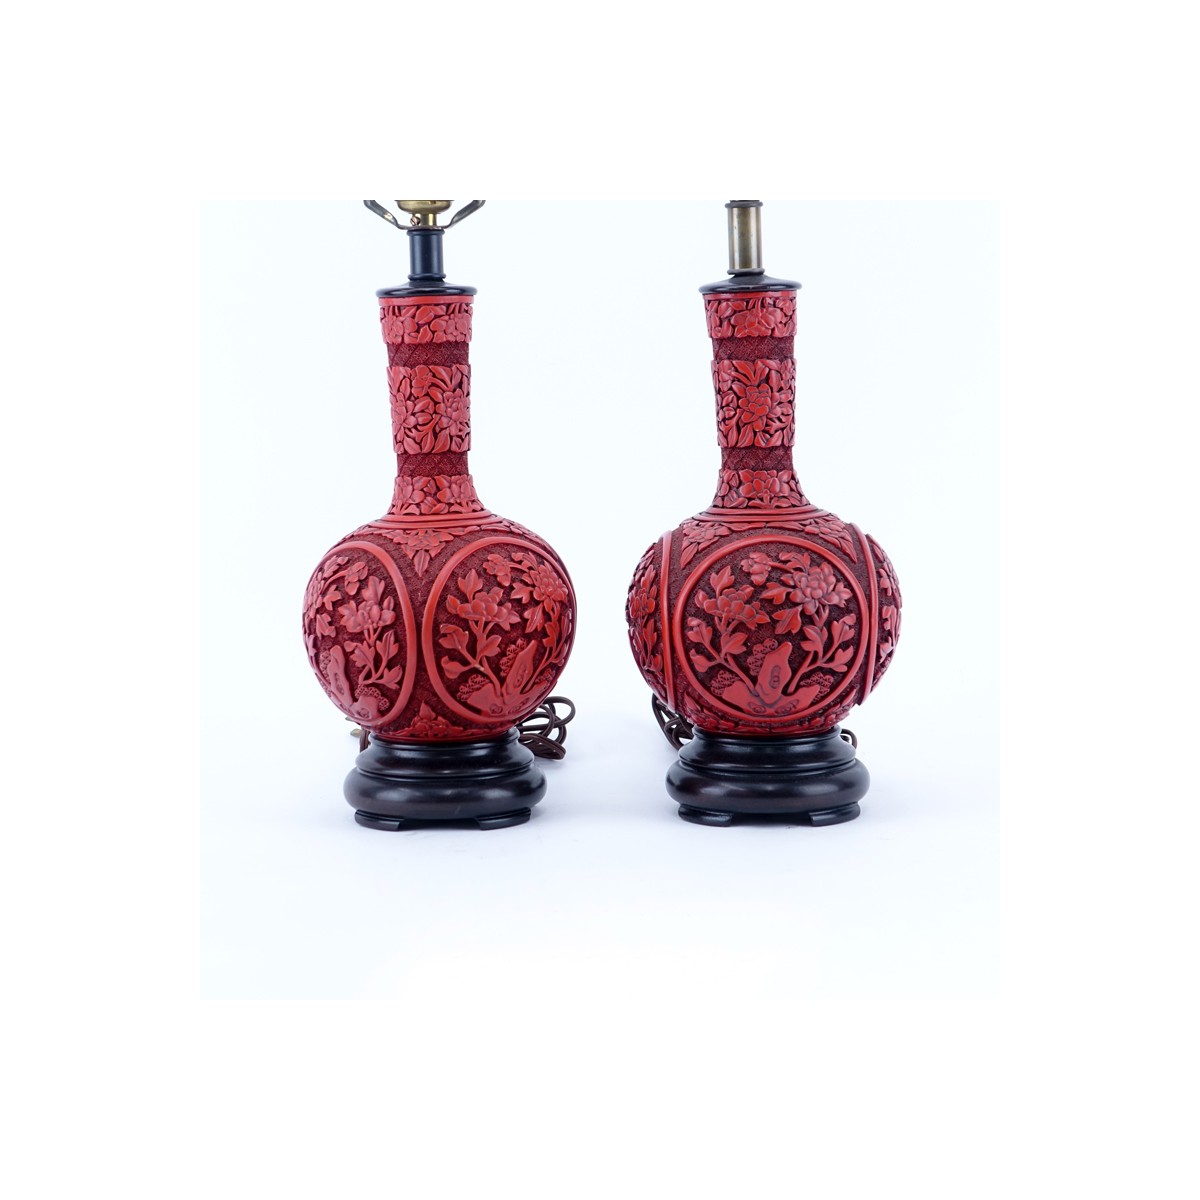 Pair of Chinese Cinnabar Style Vases Mounted as Lamps. Good condition. Overall measures 21-1/2" H, 